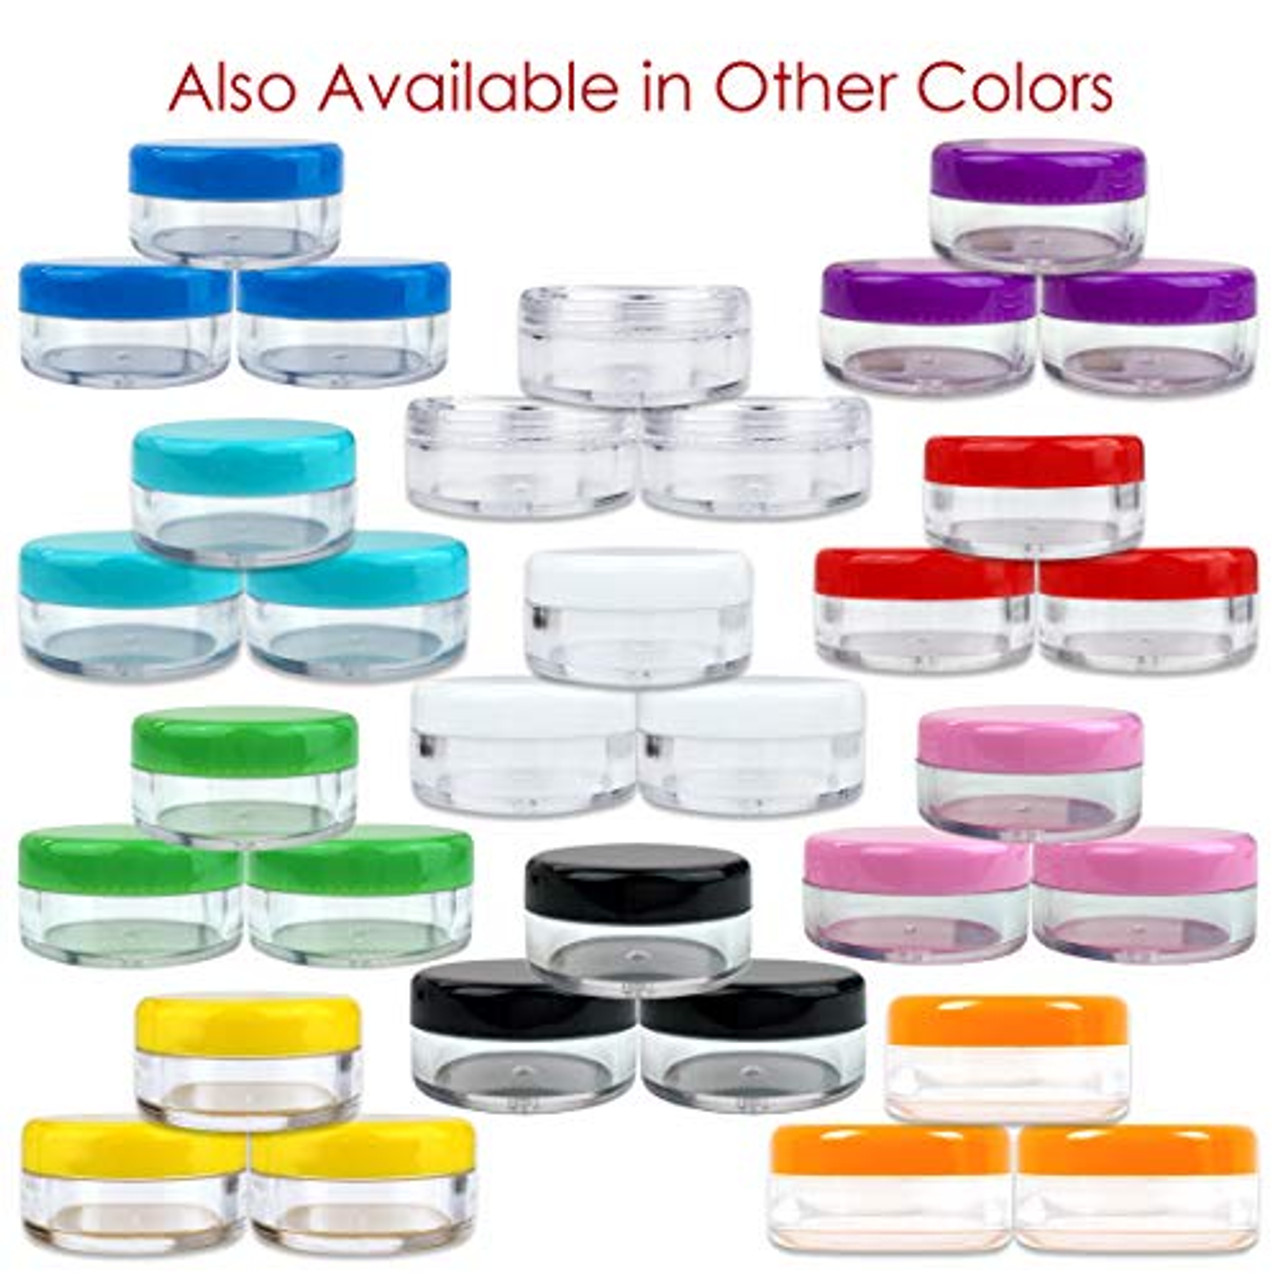 FRCOLOR 8pcs Acrylic Cream Jar Empty Face Cream Containers Lotion